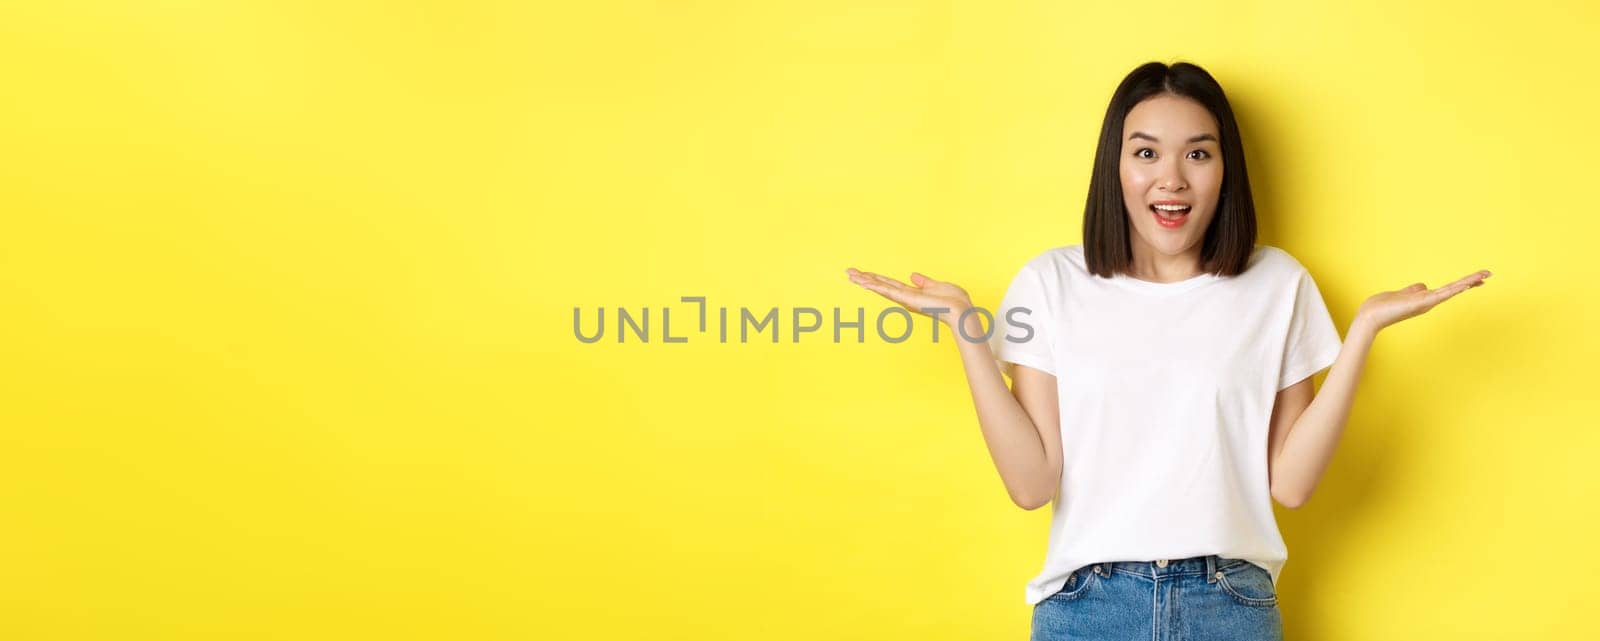 Beauty and fashion concept. Surprised asian girl spread hands sideways, holding on palms, pointing at two products, standing over yellow background.